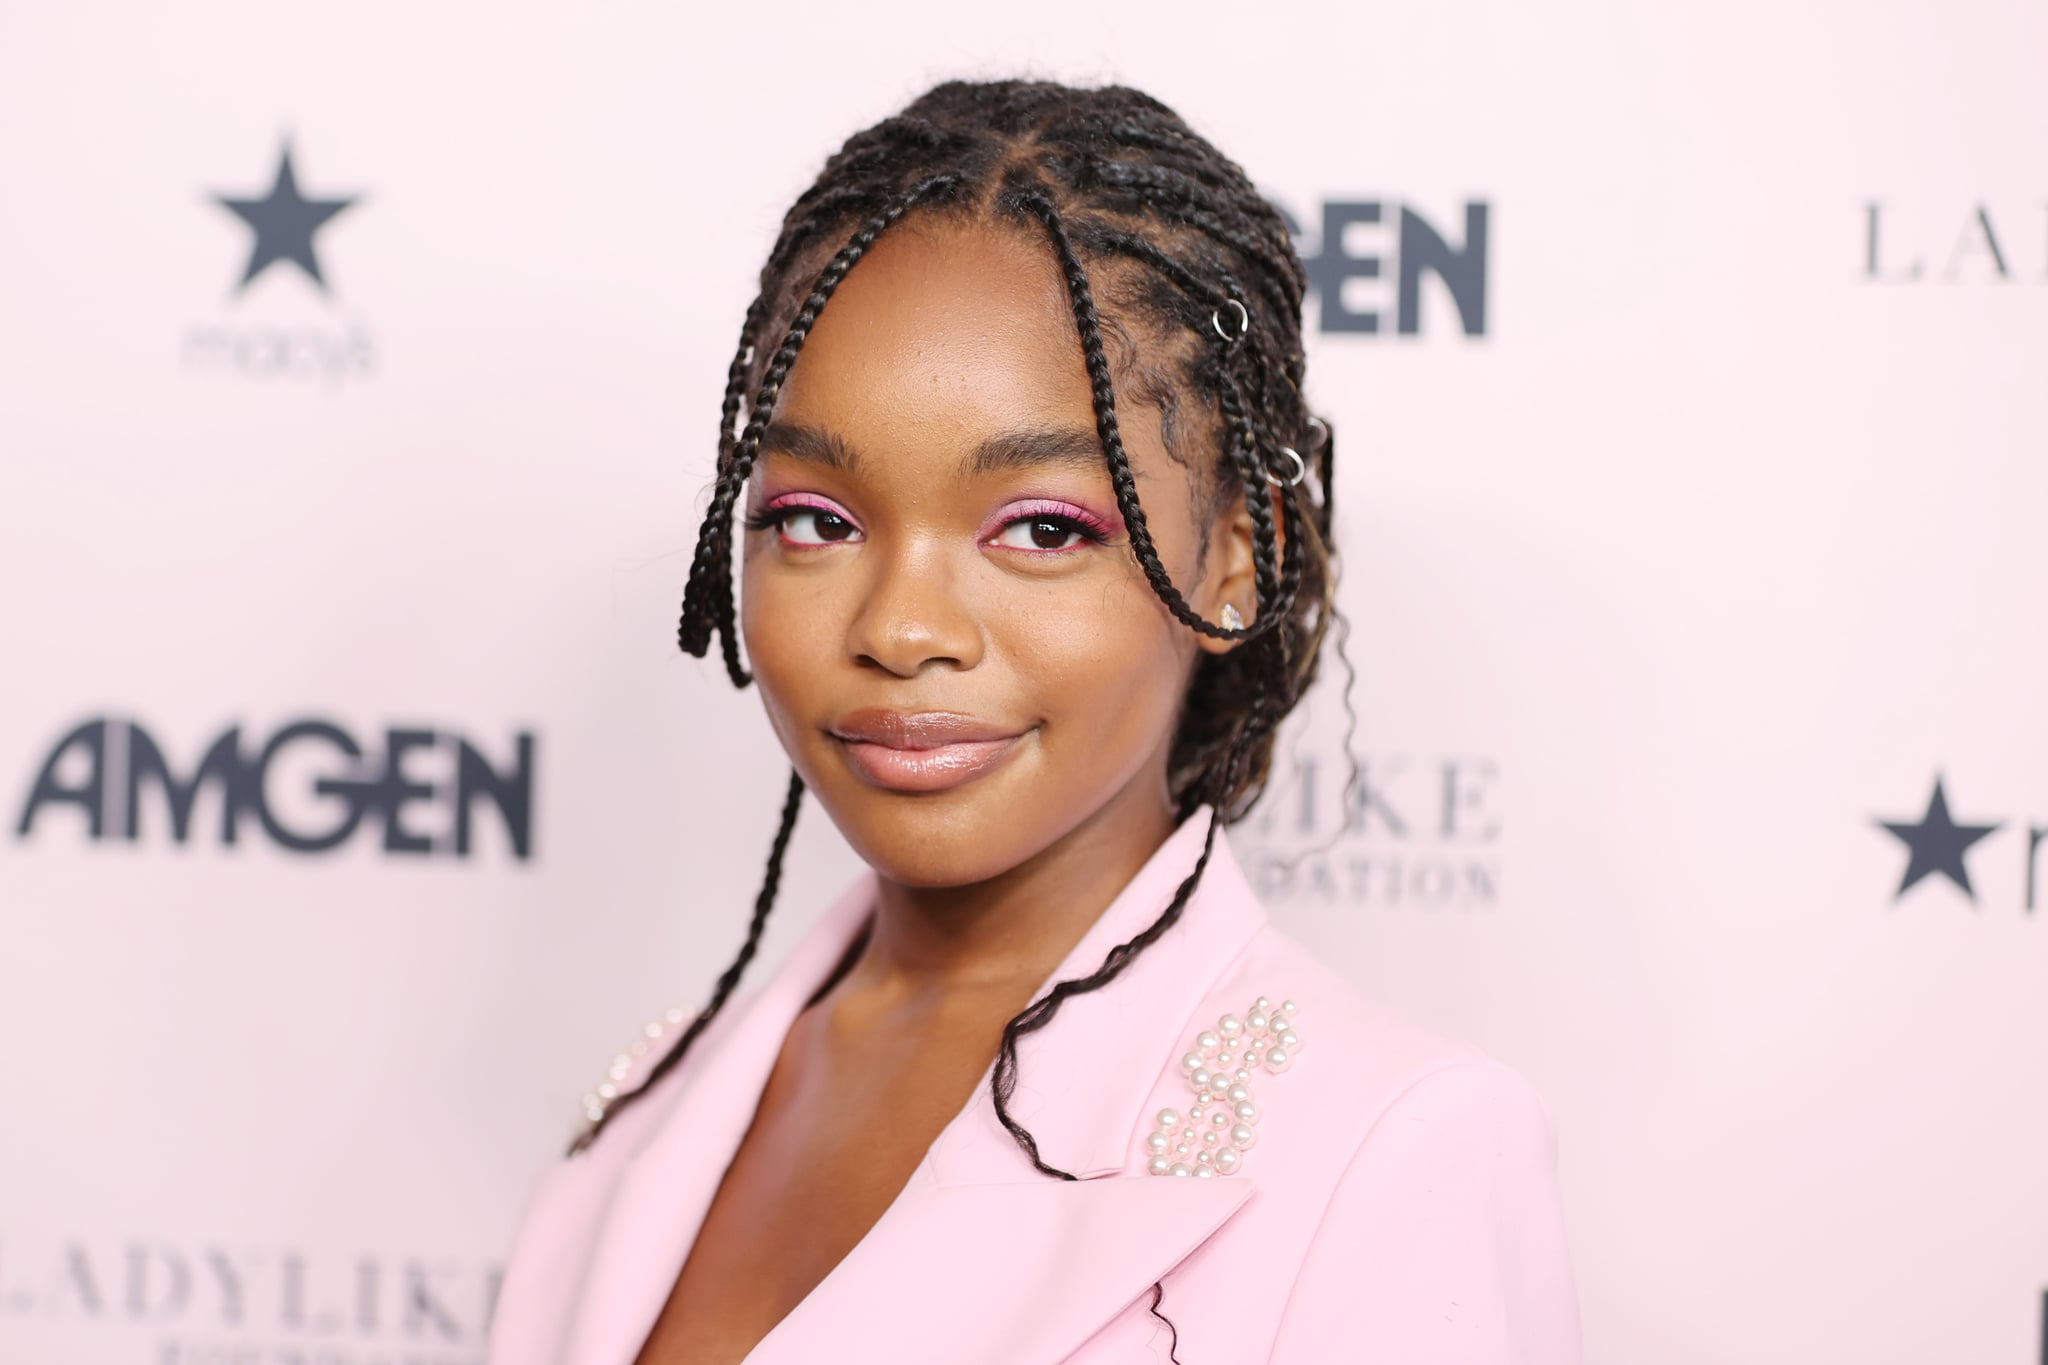 BEVERLY HILLS, CALIFORNIA - SEPTEMBER 11: Marsai Martin attends the 12th Annual Ladylike Foundation Women Of Excellence Awards And Fashion Show at The Beverly Hilton on September 11, 2021 in Beverly Hills, California. (Photo by Amy Sussman/Getty Images)